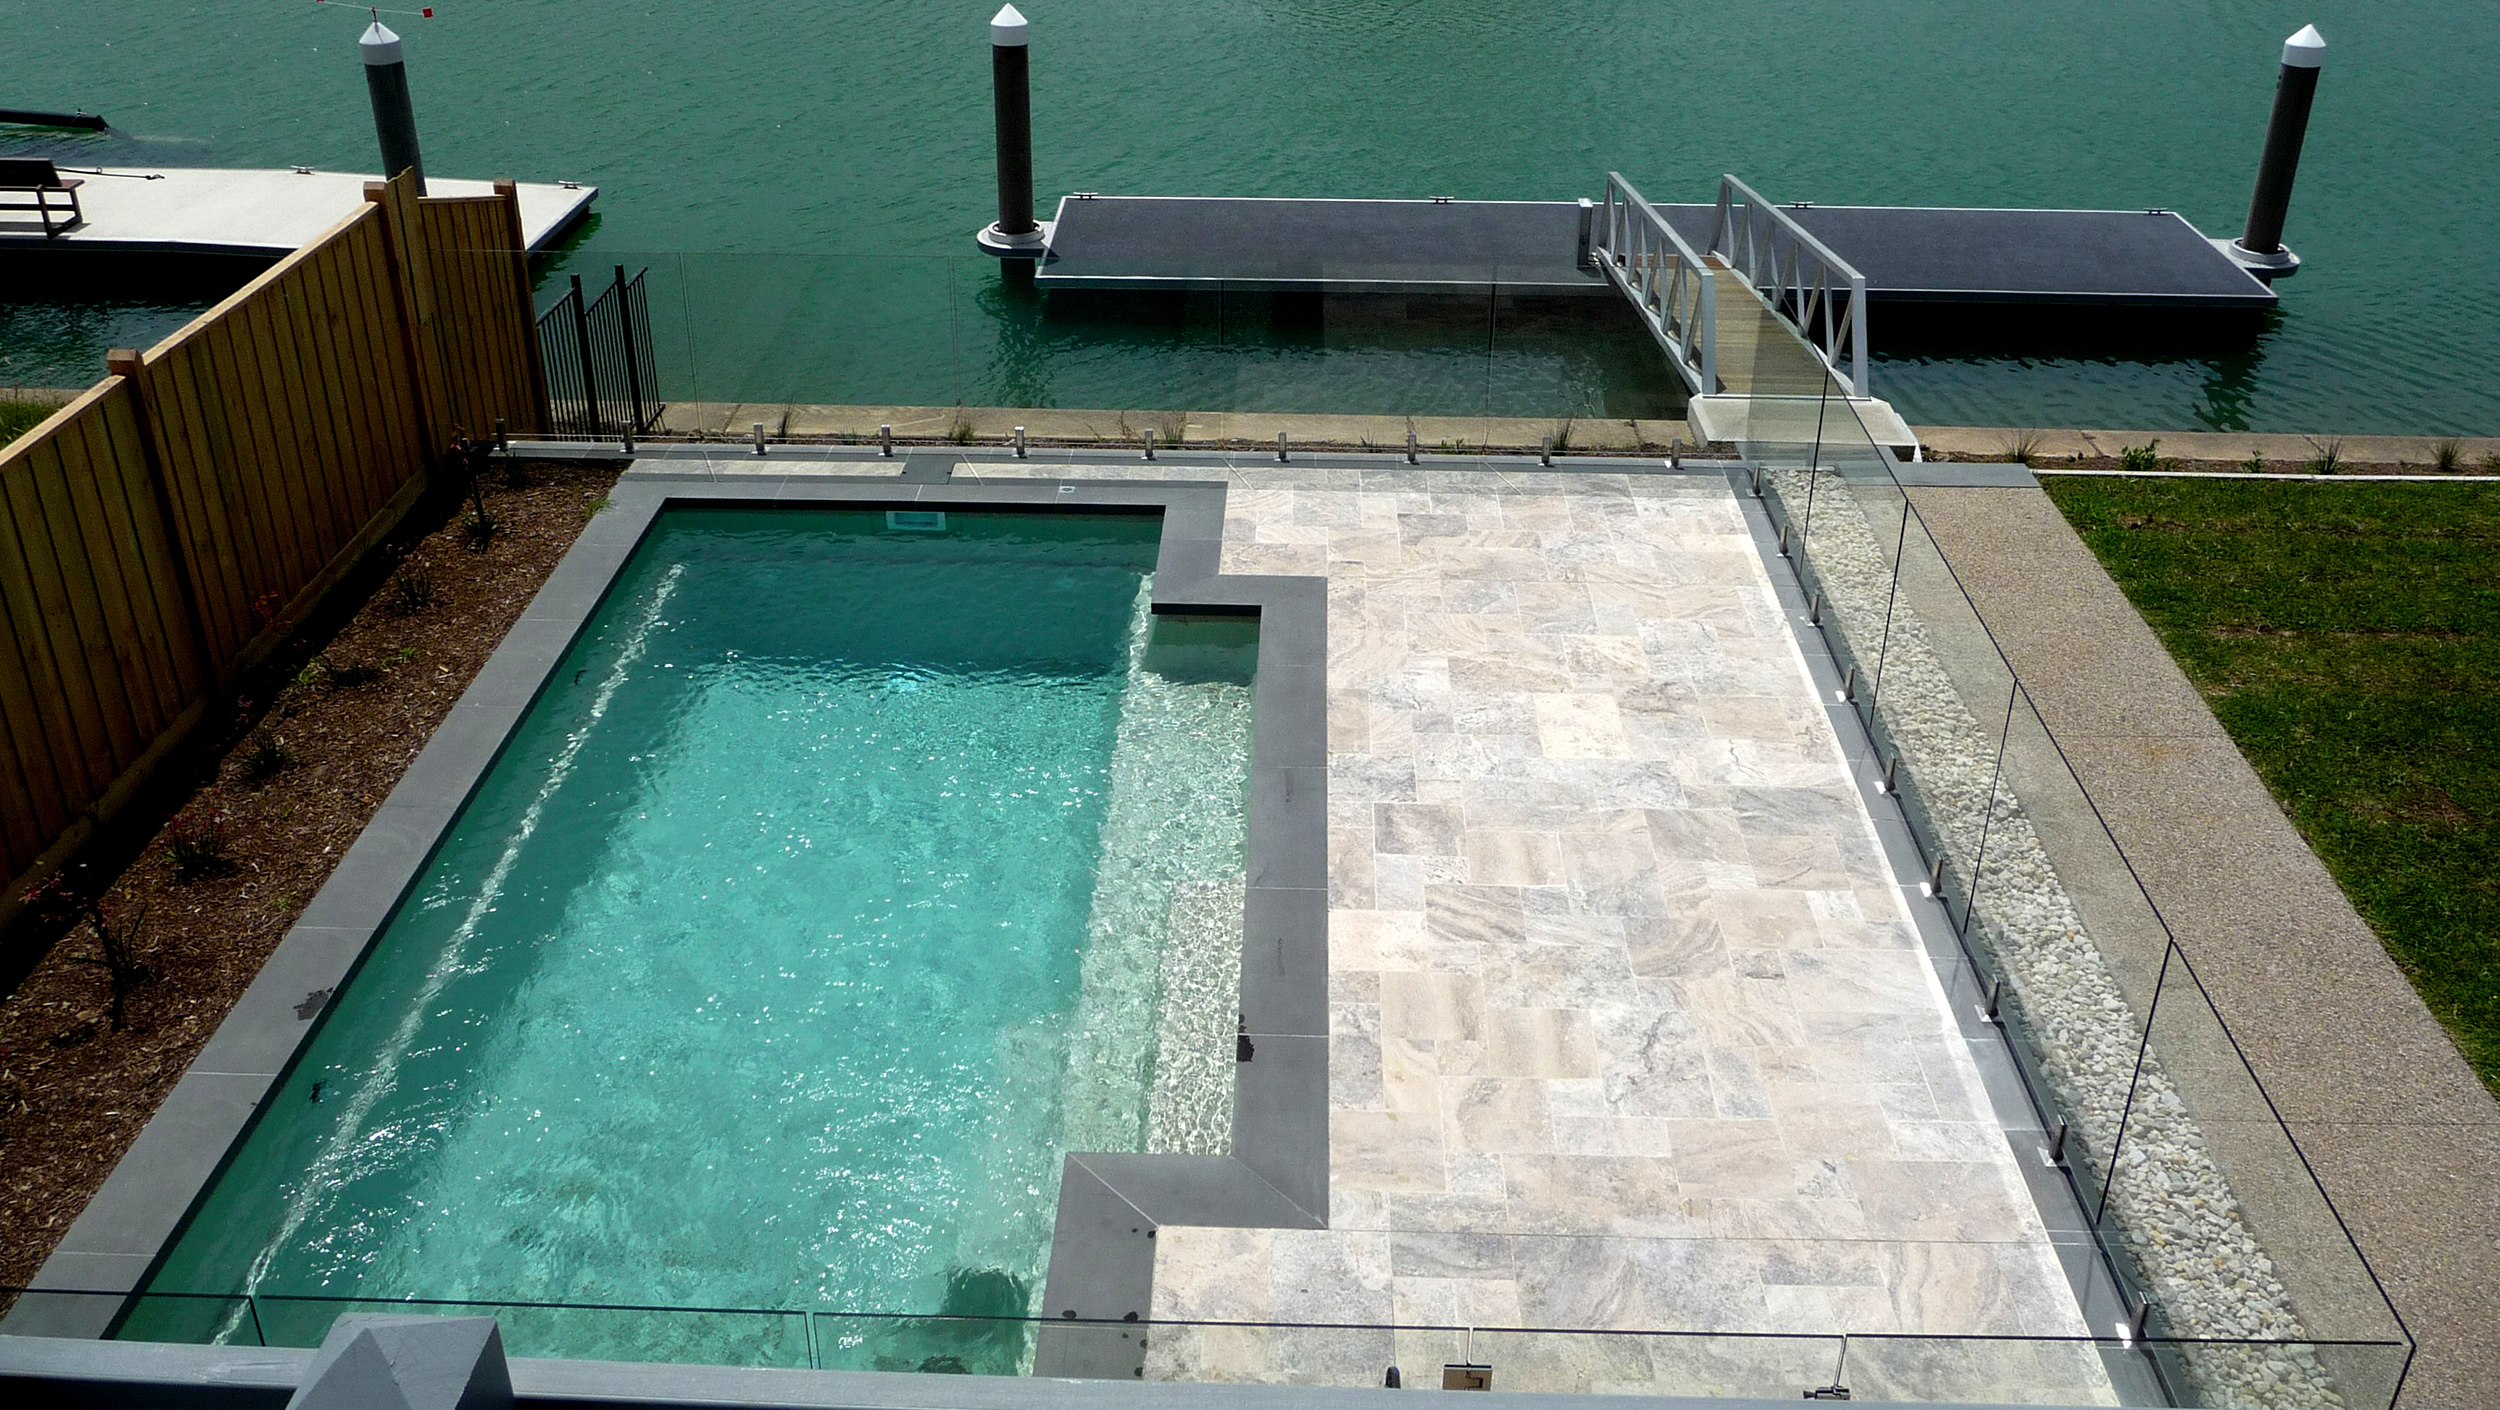  Silver Unfilled Travertine with Bluestone Copers around Pool 